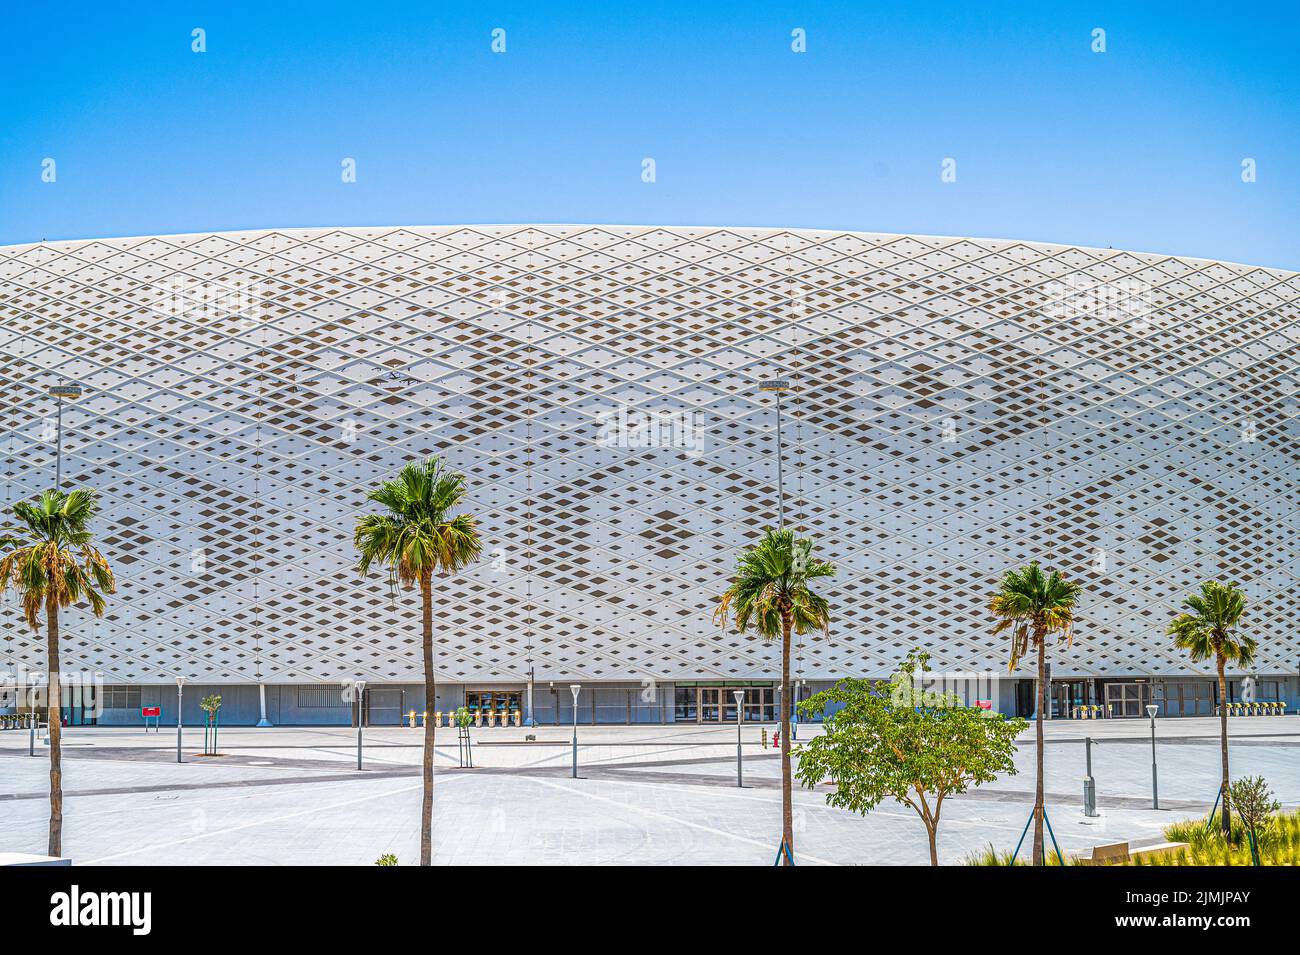 Al Thumama Stadium located in Qatar for the 2022 for FIFA World Cup Stock Photo